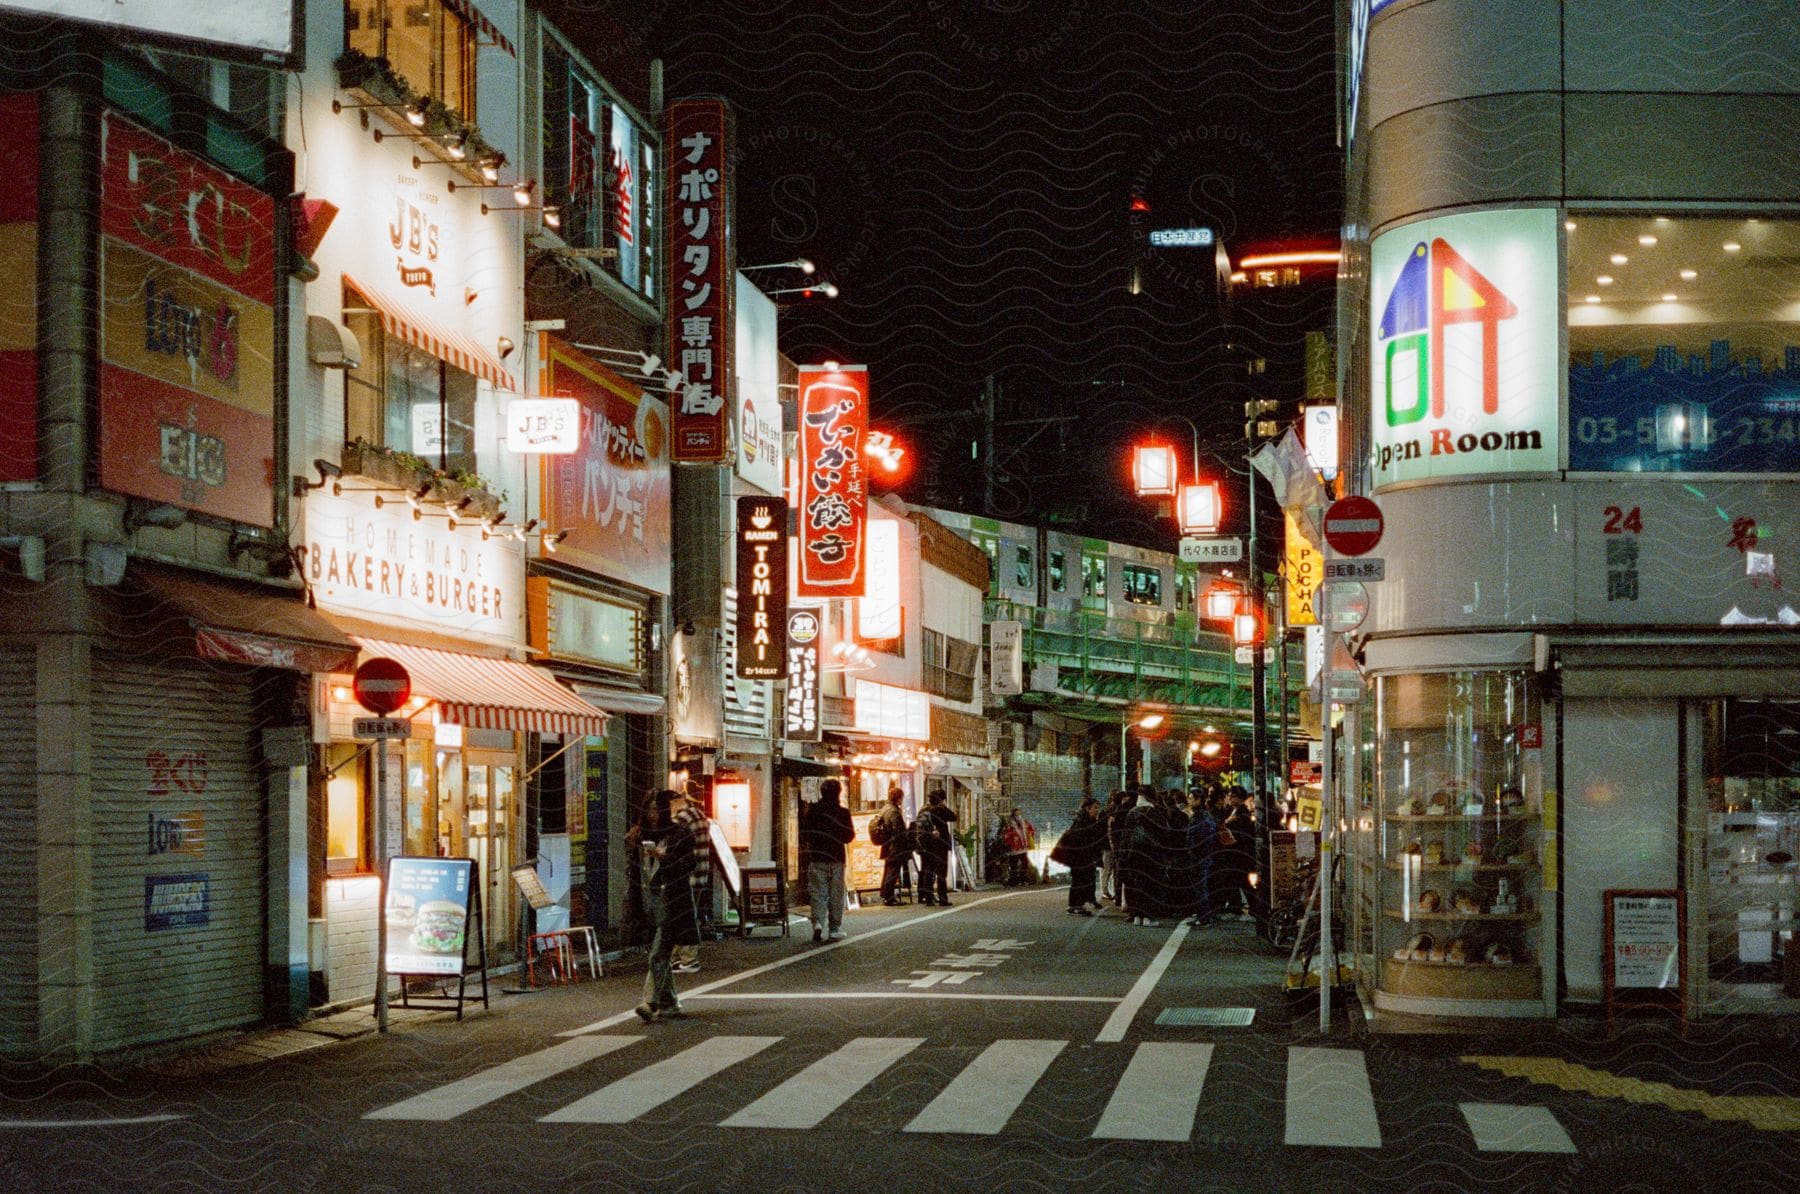 Japanese street signs and shops at night